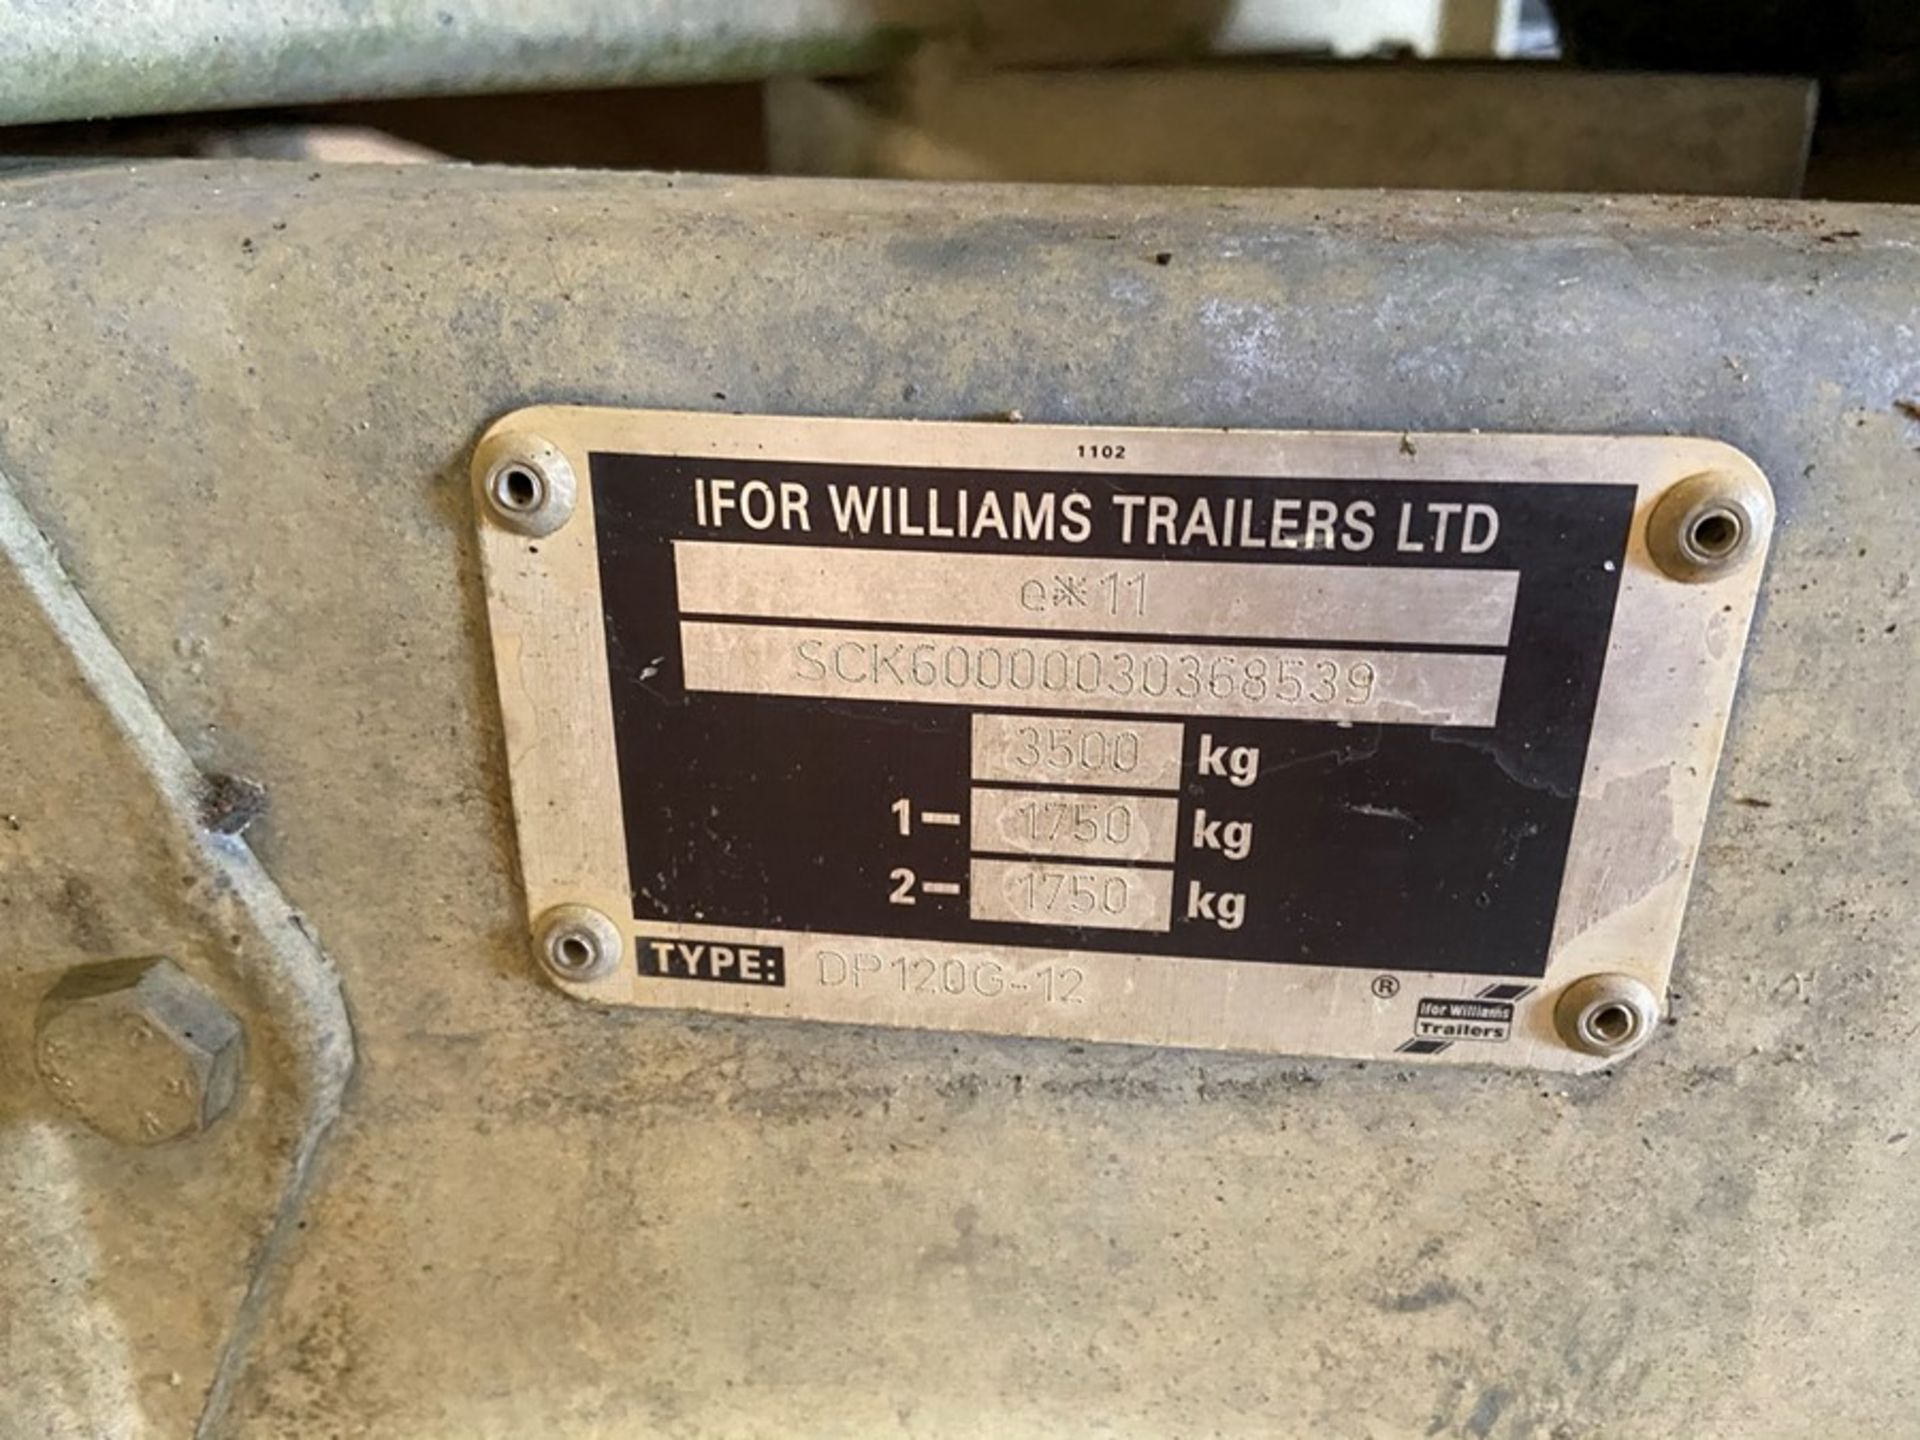 DP-1200-12 ' twin-axle cattle trailer - Image 7 of 9